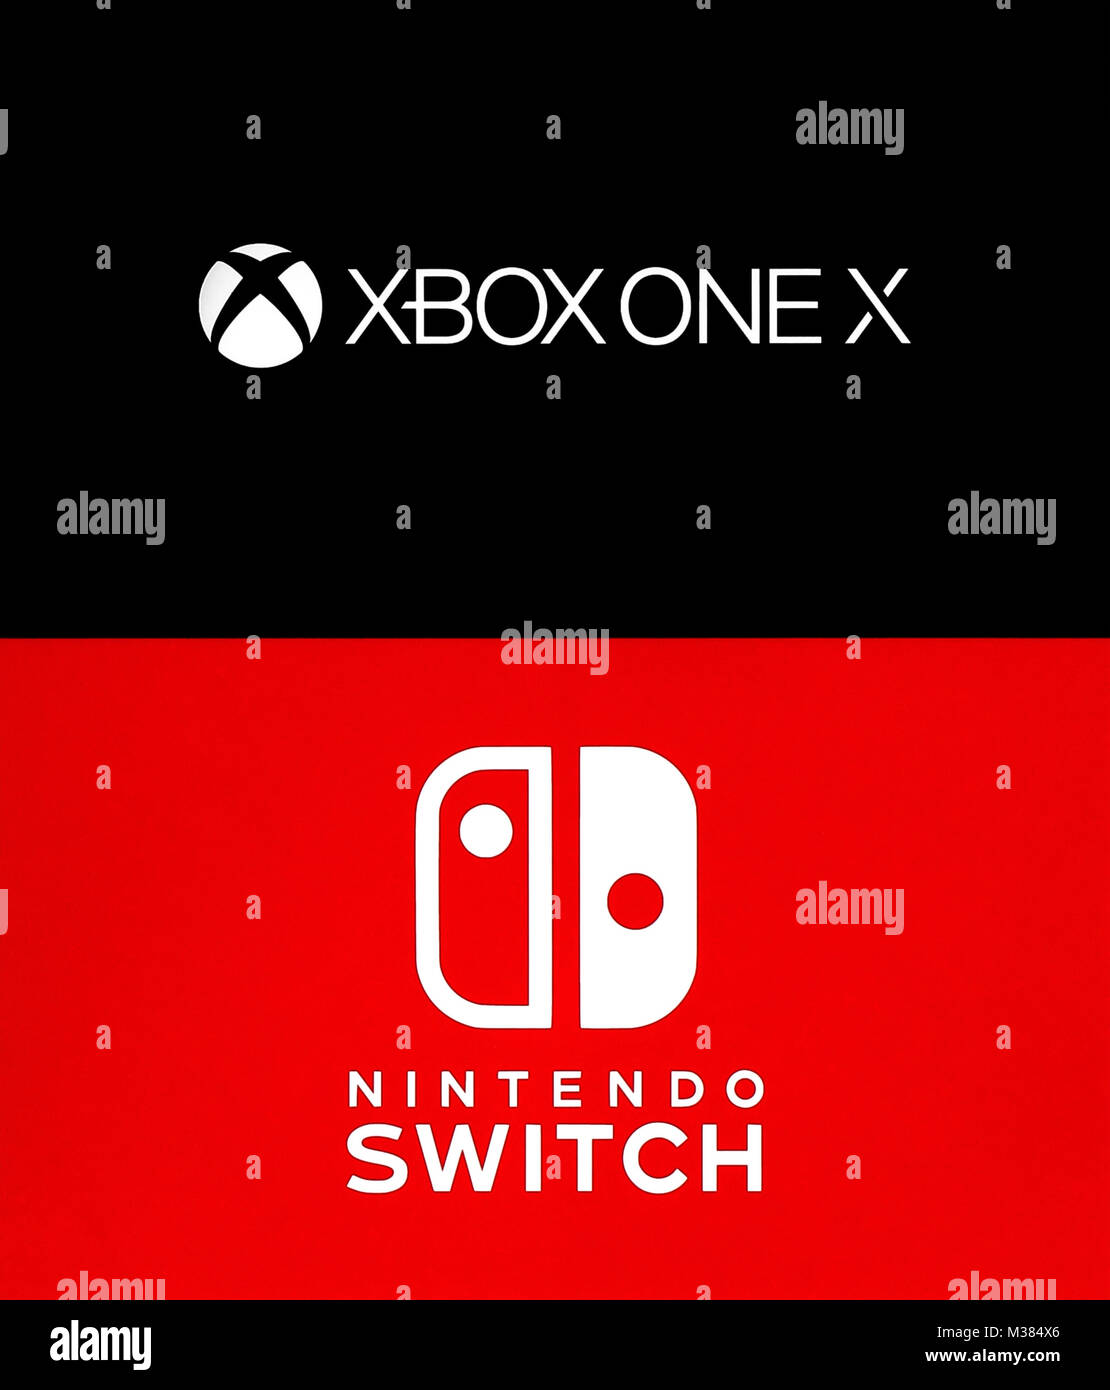 Kiev, Ukraine - August 21, 2017: Collection of popular game consoles logos: XBox One X and Nintendo Switch, printed on white paper Stock Photo